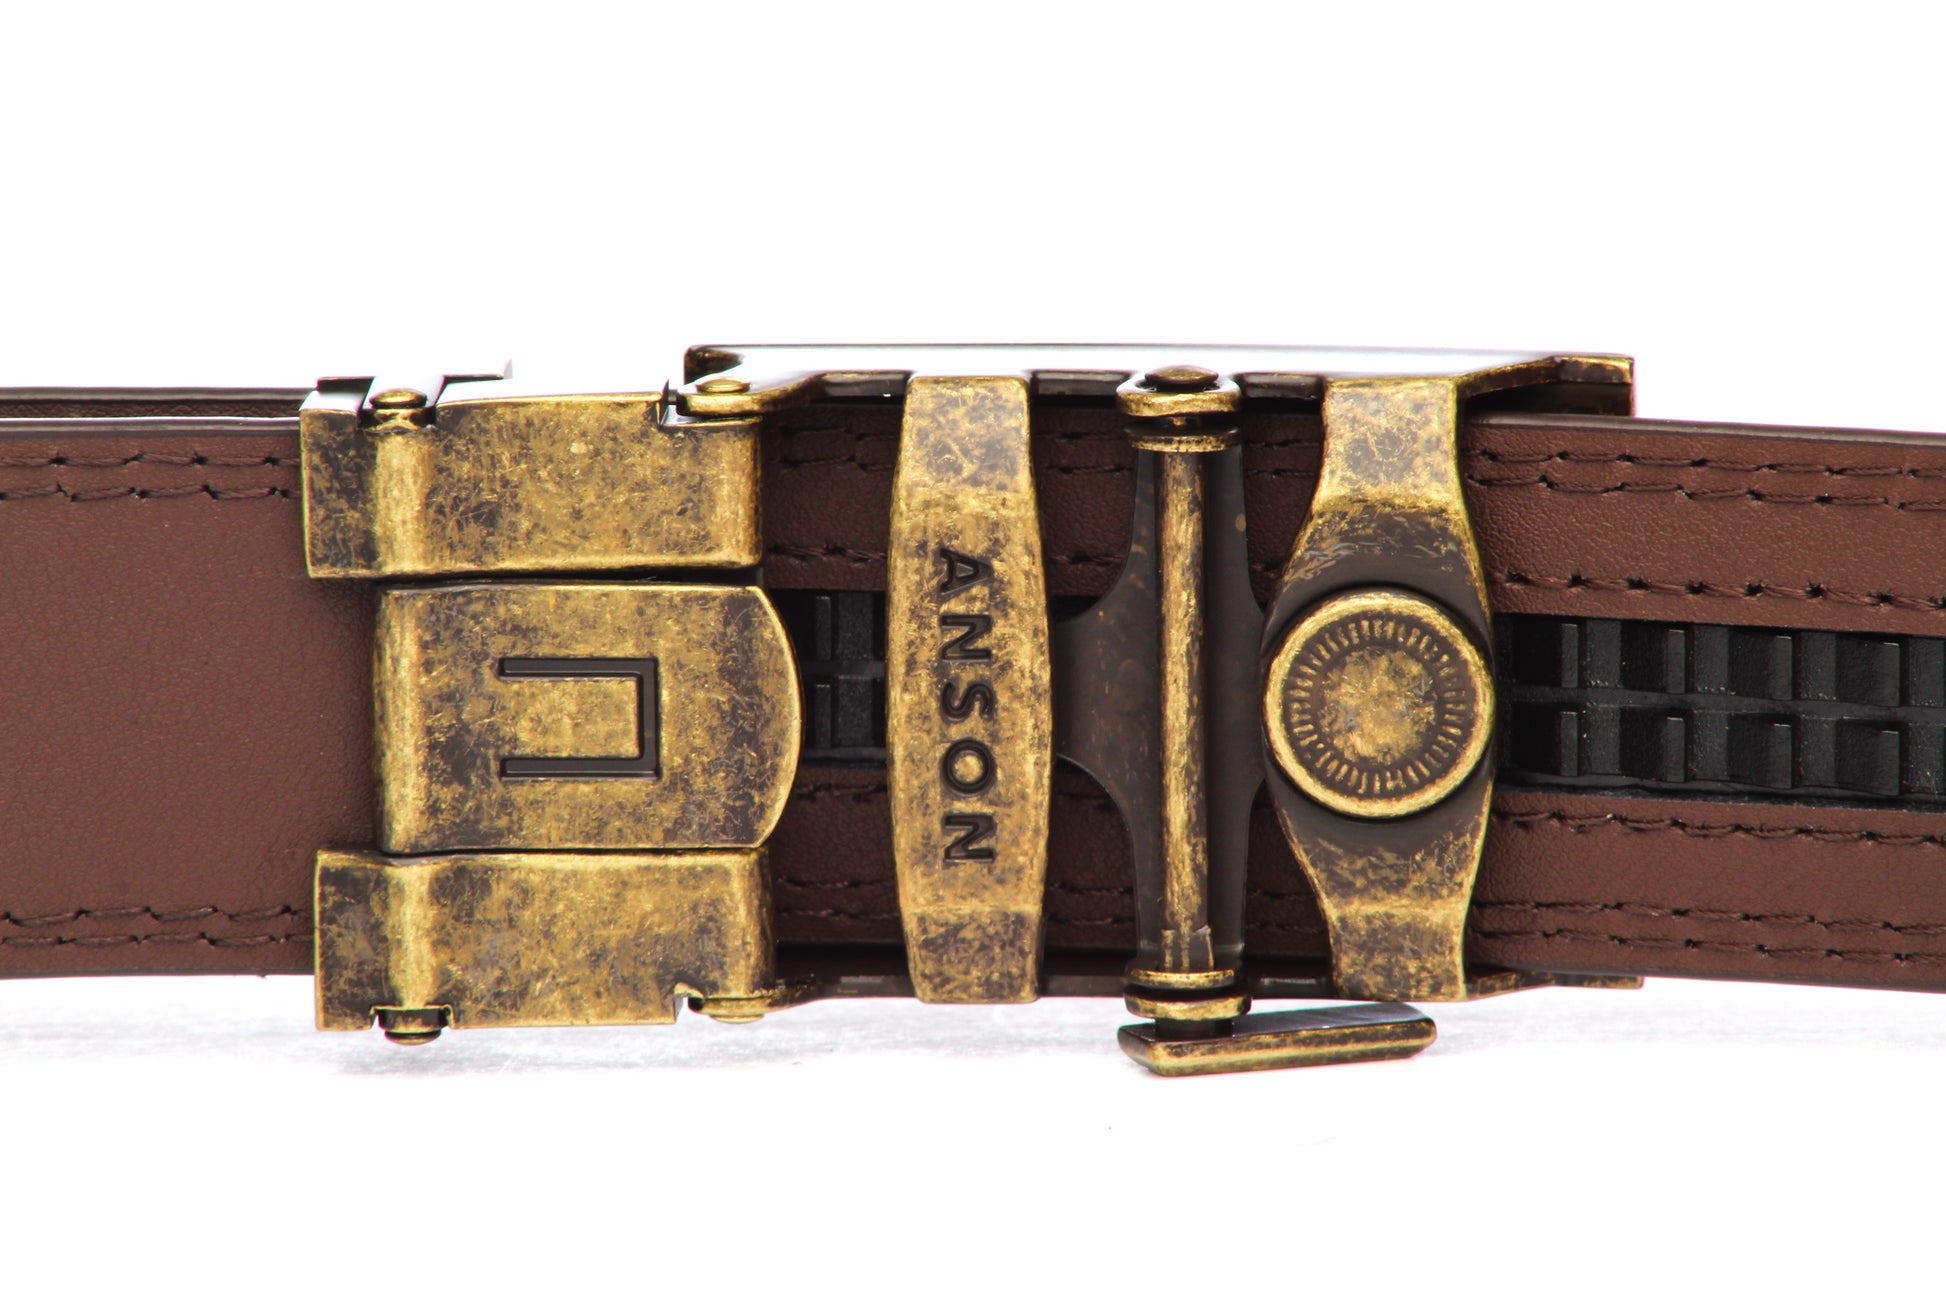 Men's golf ratchet belt buckle in antiqued gold with a 1.25-inch width, back view.